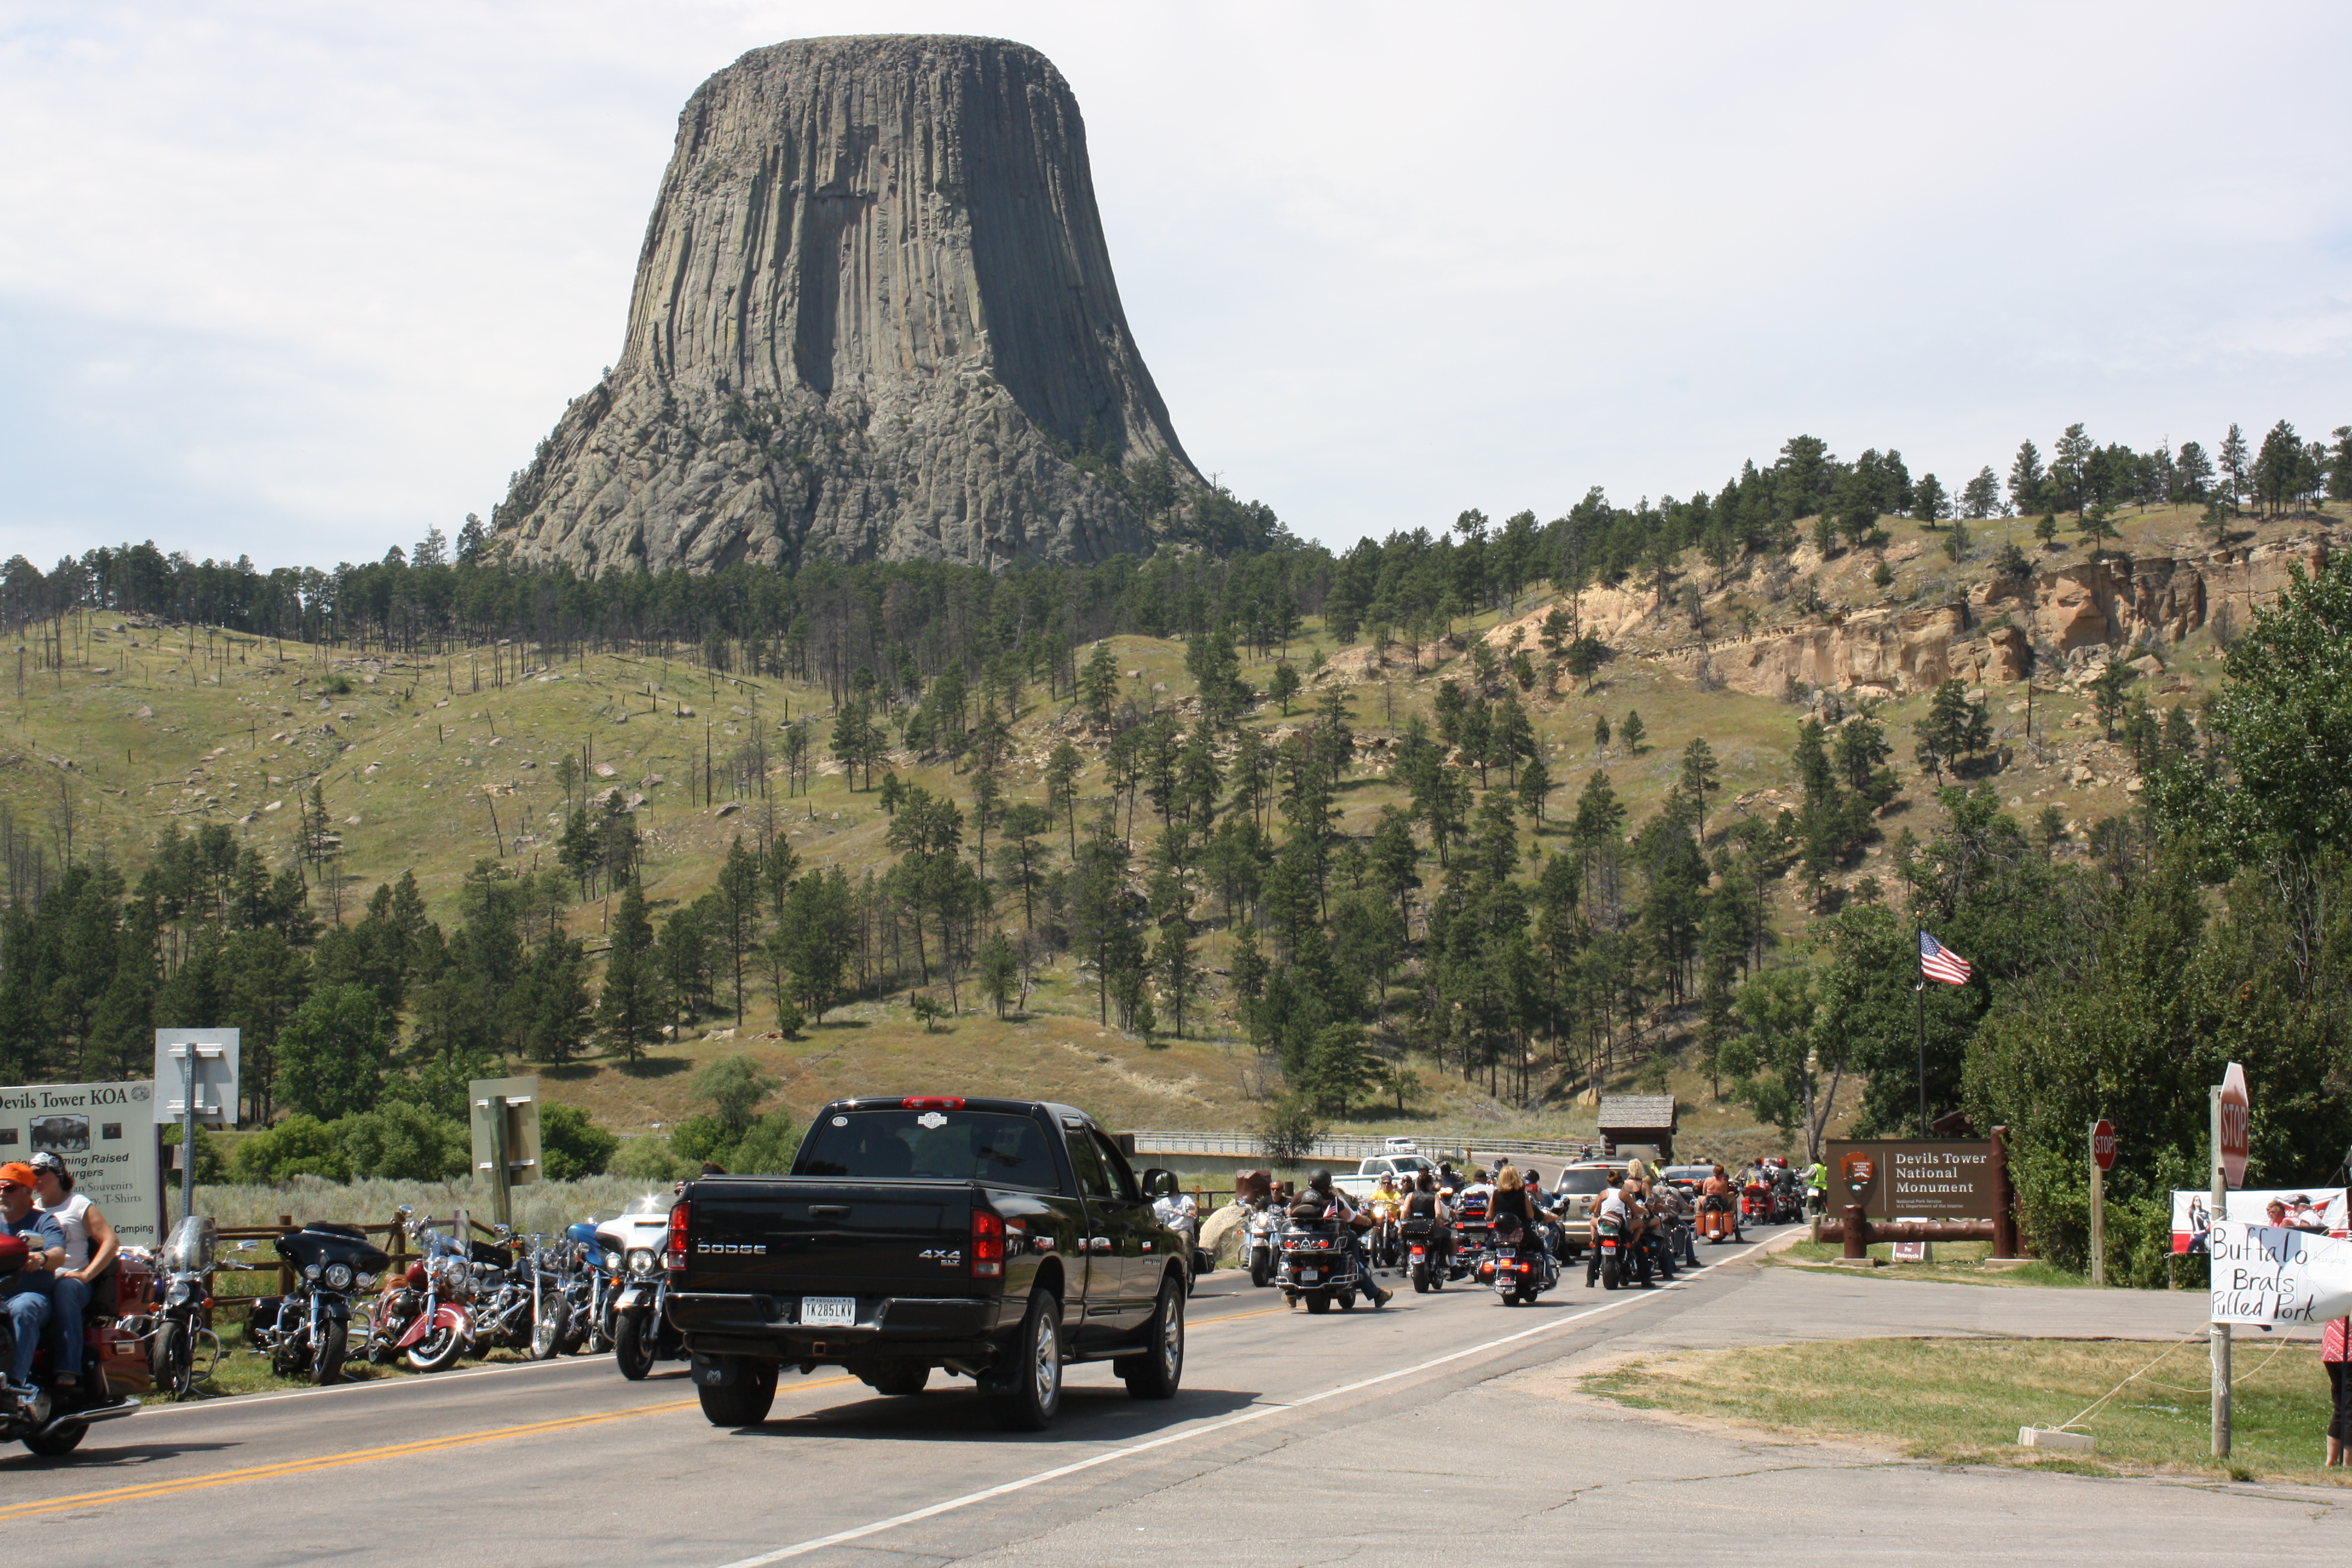 Devils Tower Changes Entrance Fee to Address Infrastructure Needs & Improve Visitor Experience